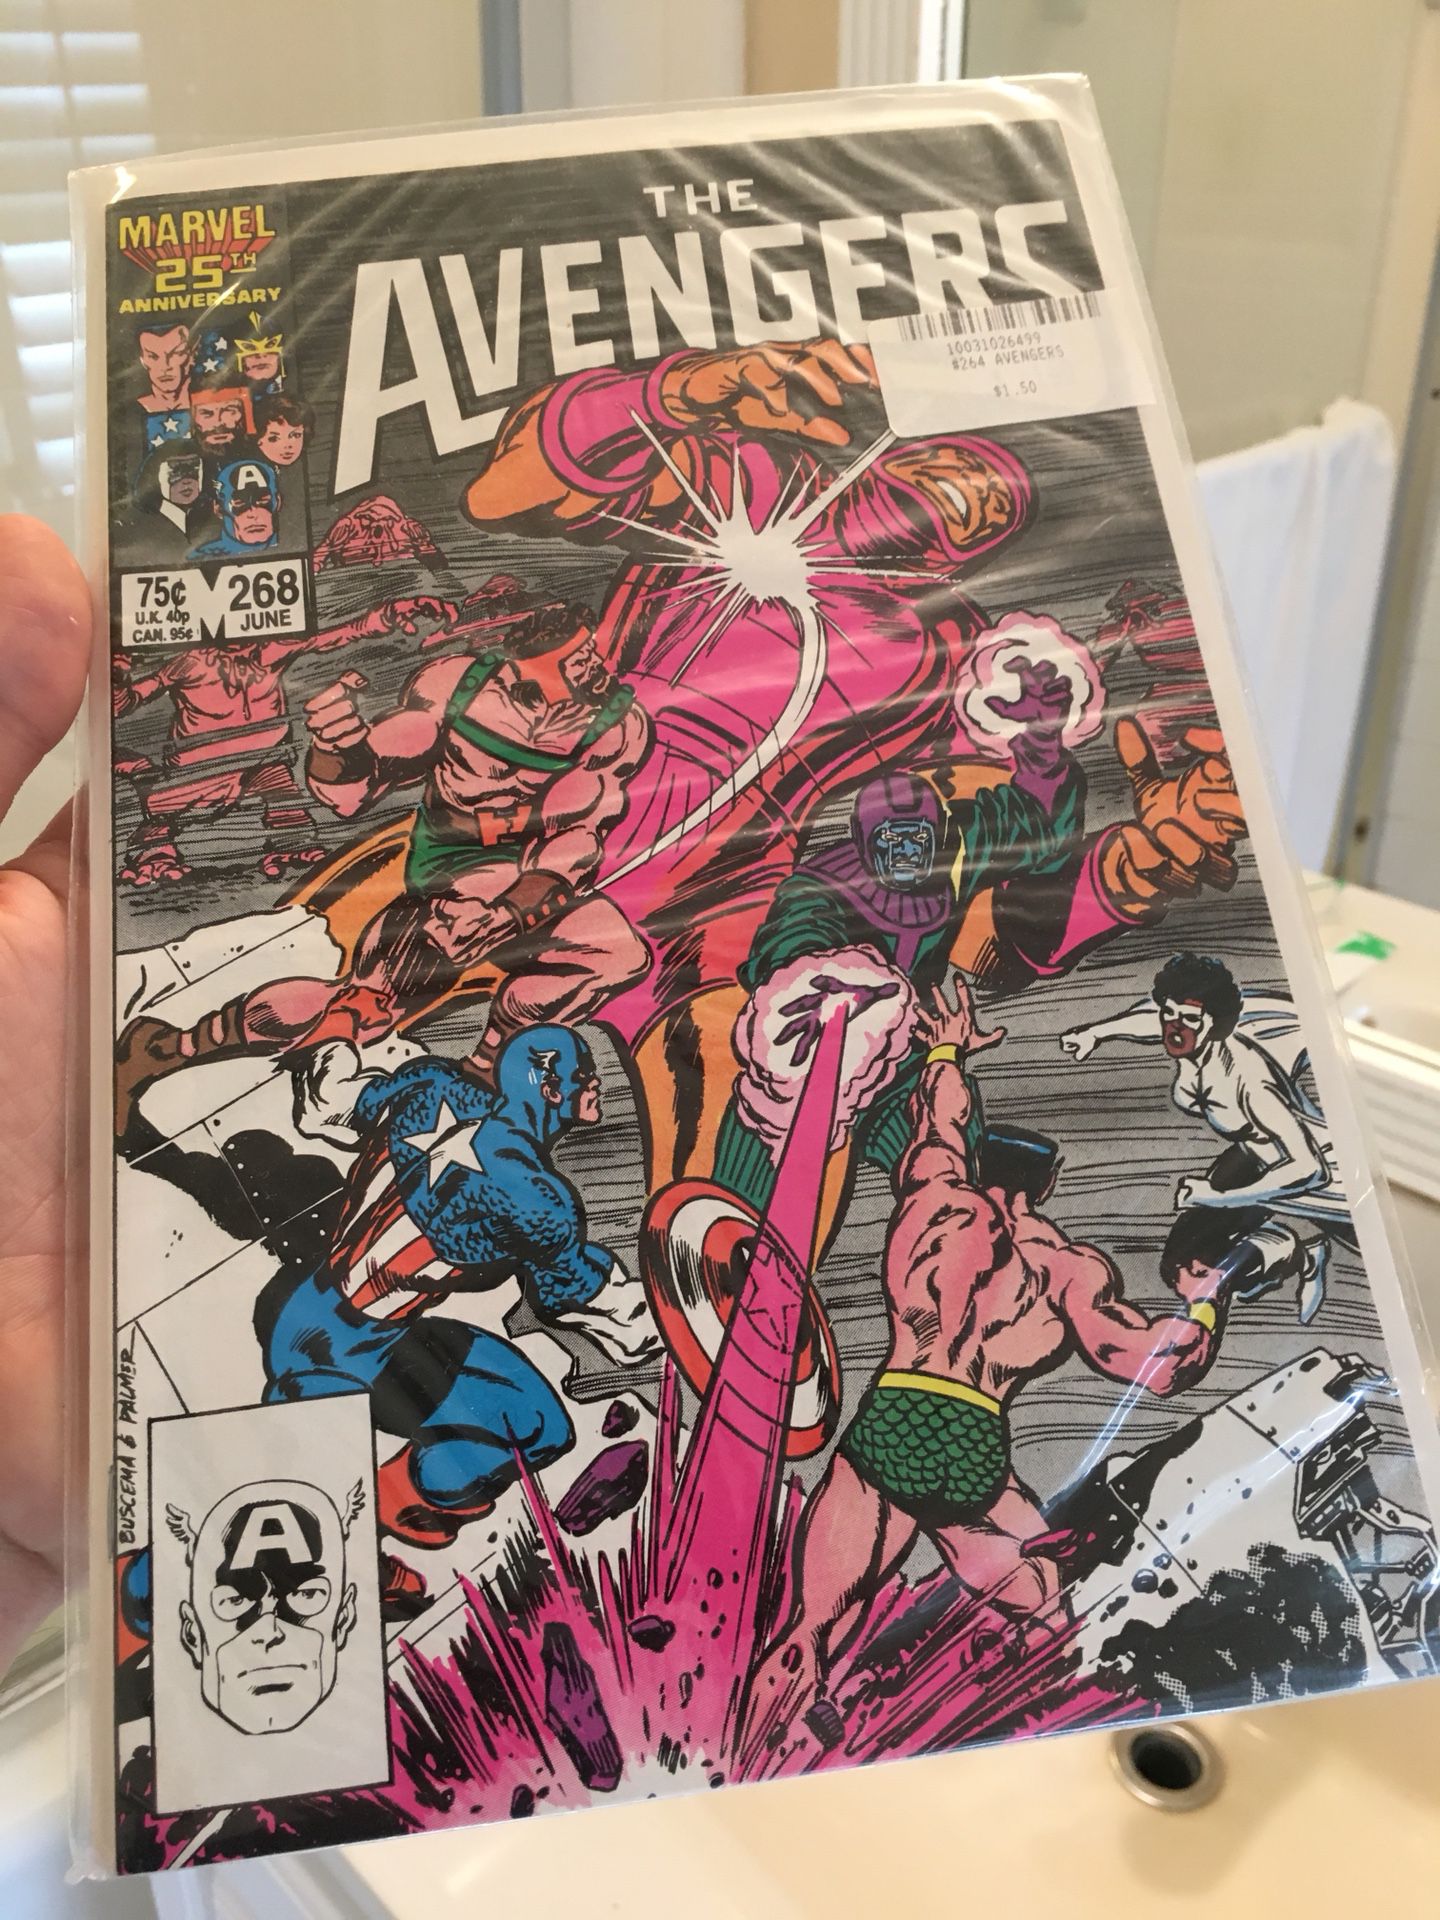 The Avengers Comic Issue 268!! Fantastic condition